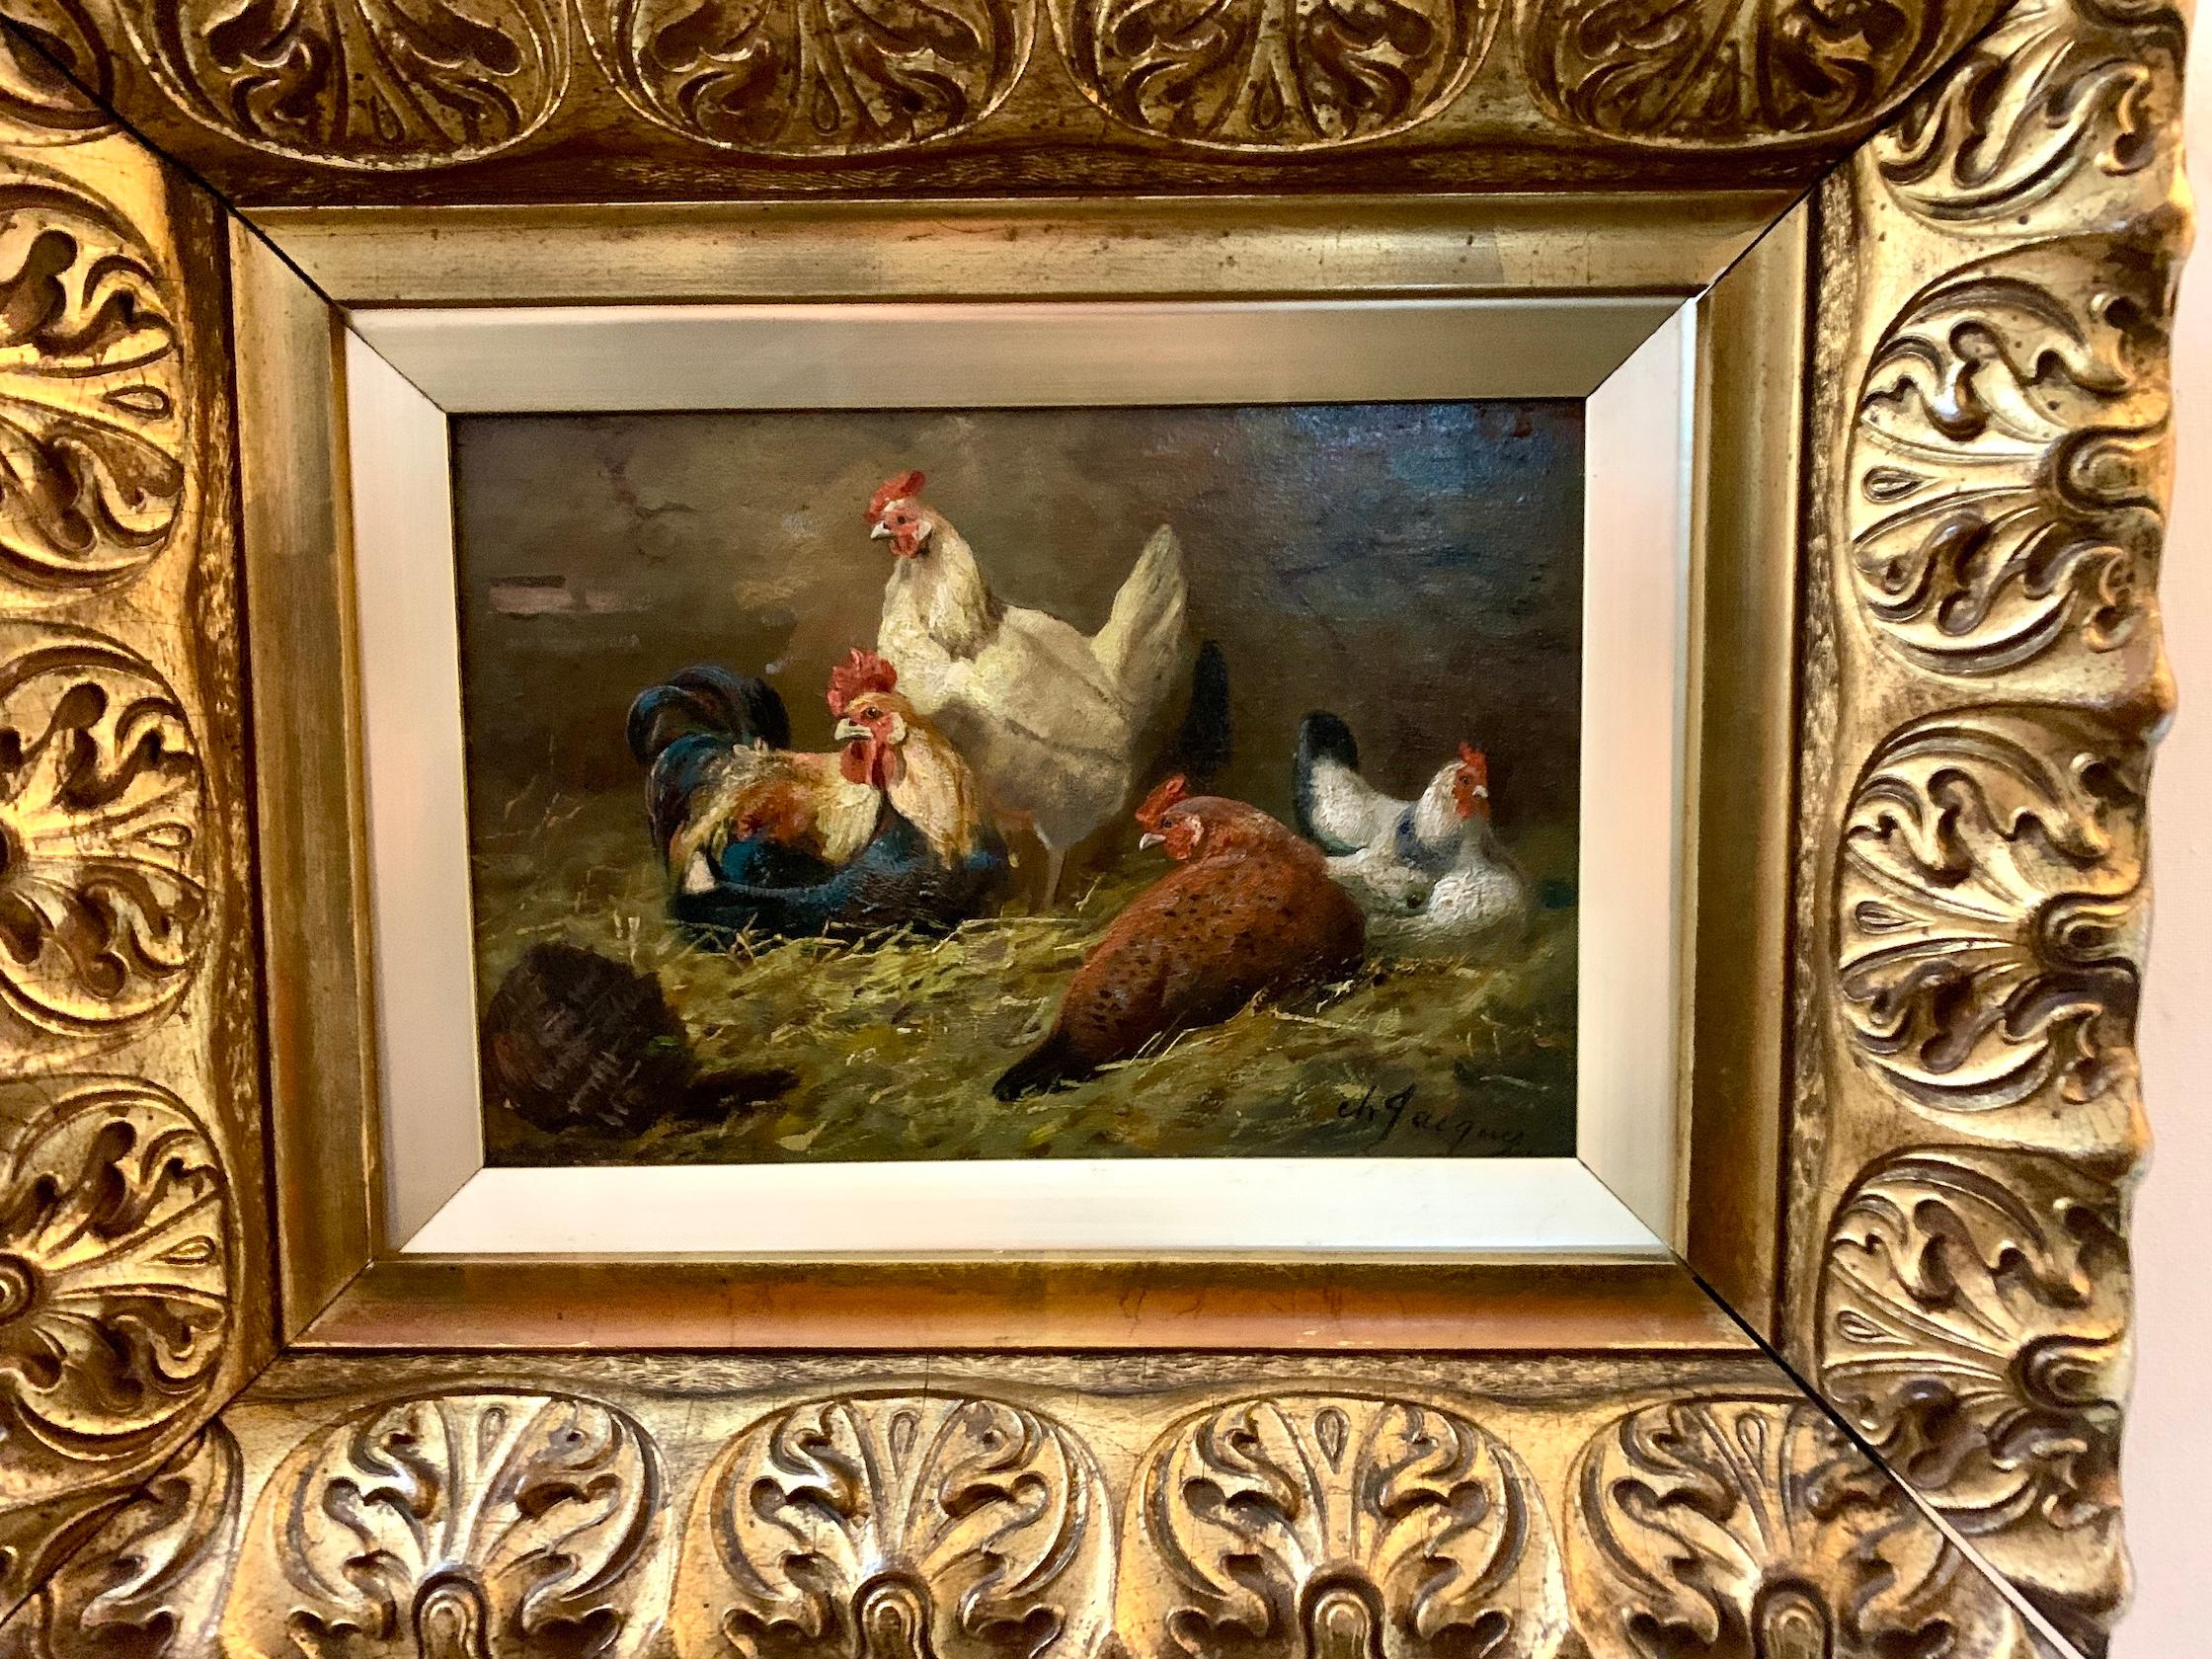 French 19th century Chickens in a barn or chicken coop interior - Painting by Charles-Emile Jacque